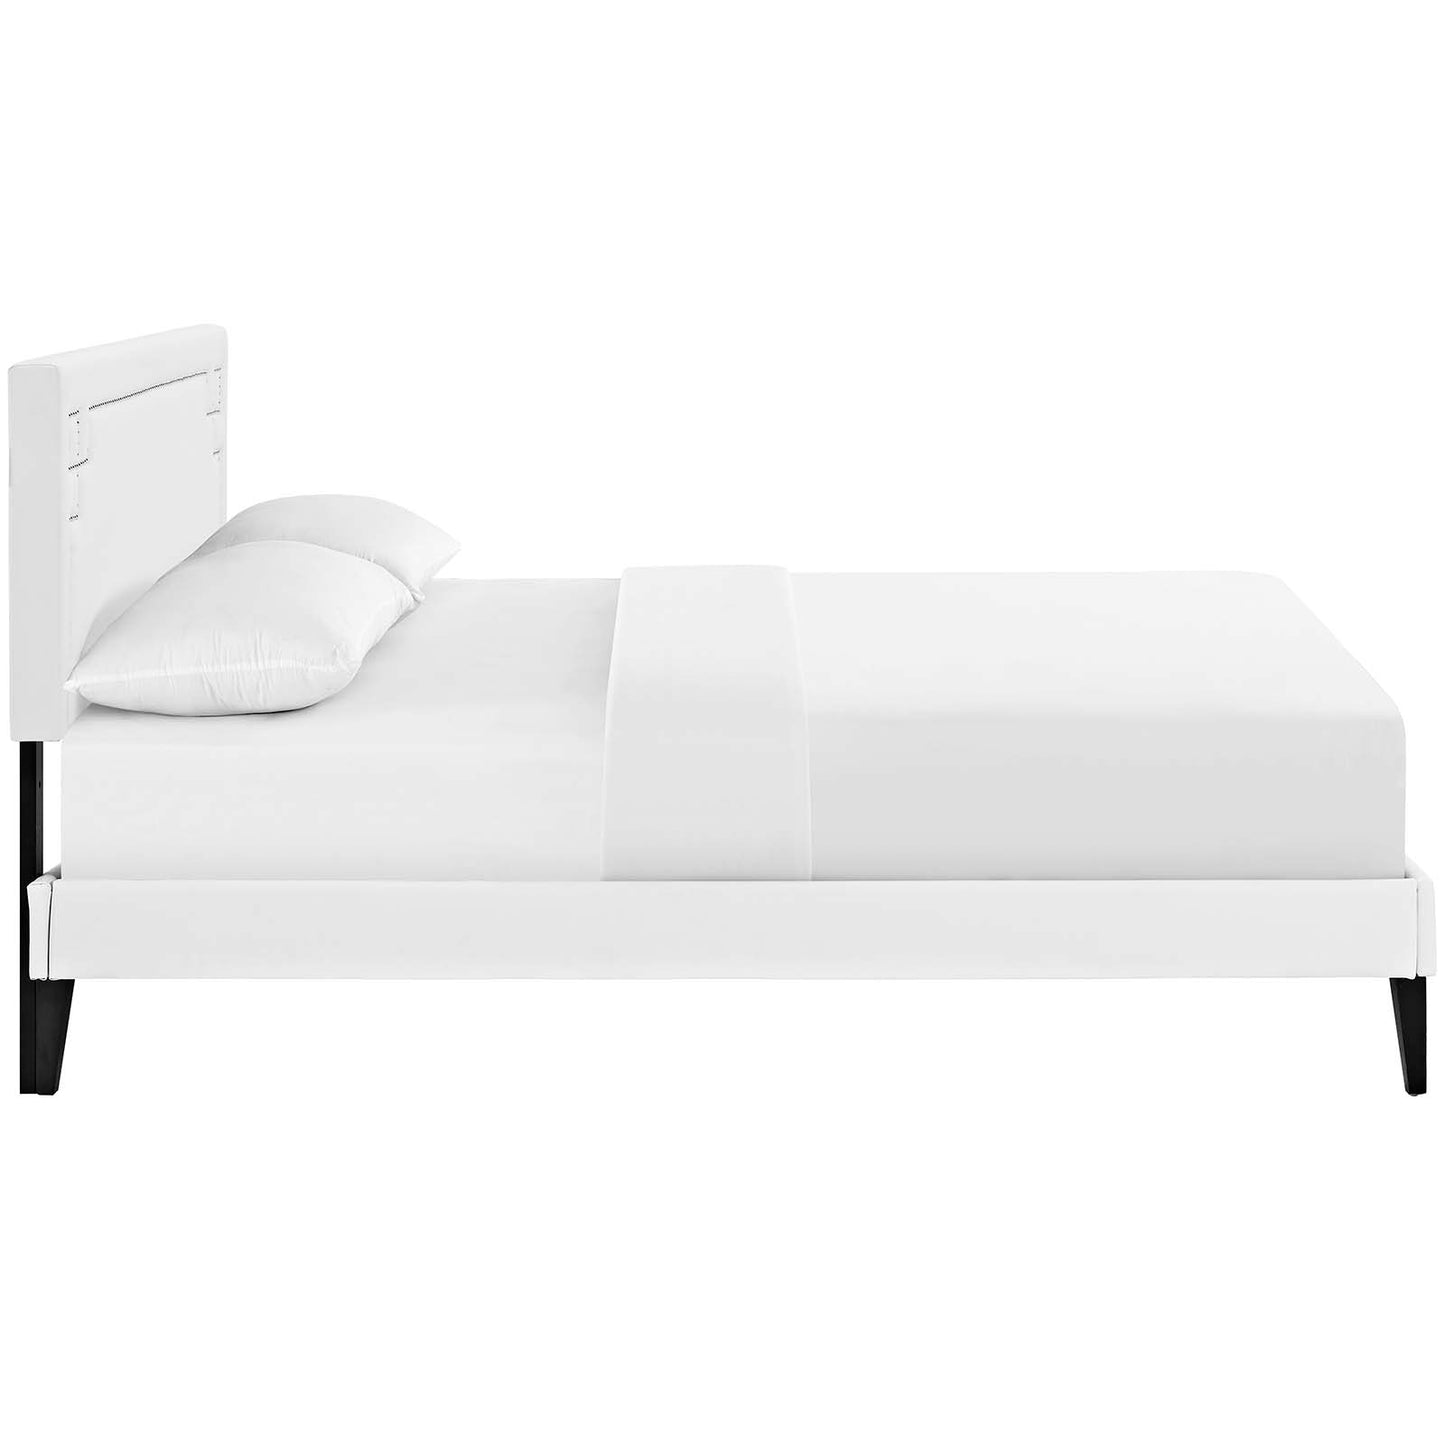 Ruthie Queen Vinyl Platform Bed with Squared Tapered Legs White MOD-5938-WHI